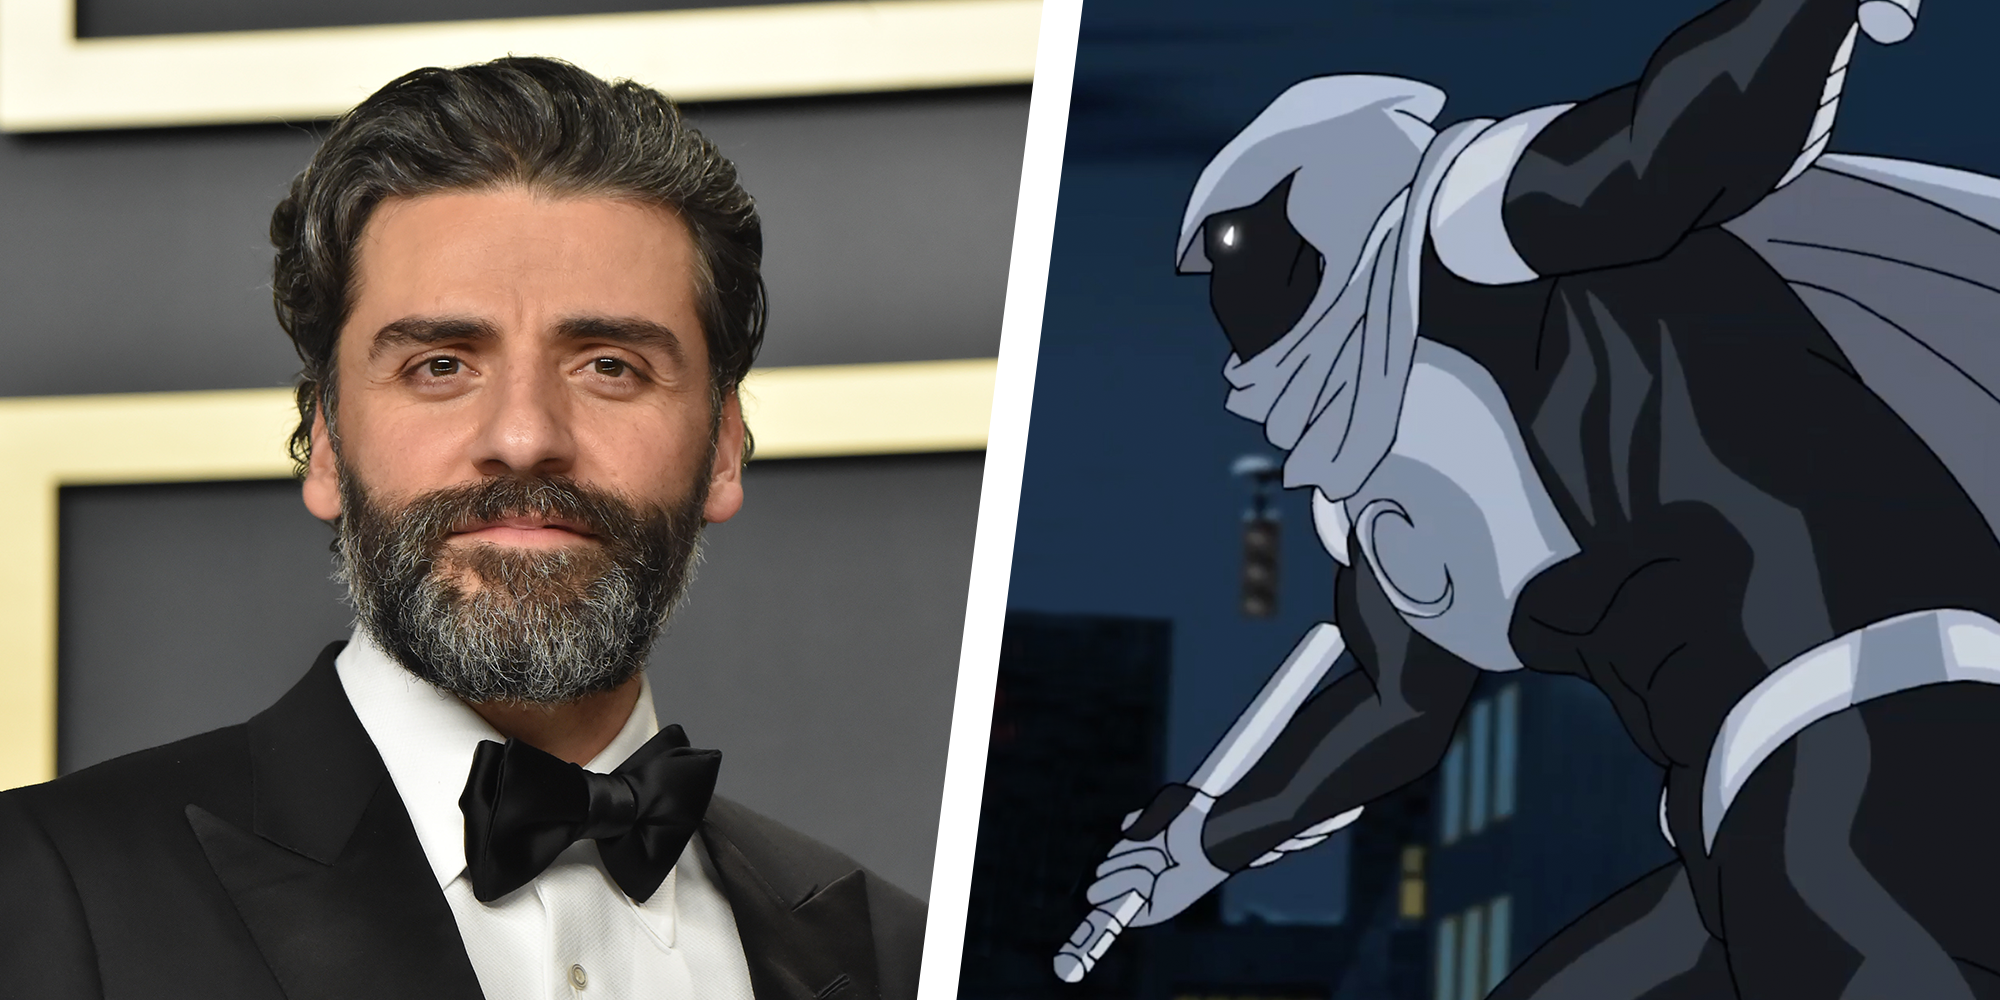 Moon Knight Season 2: Oscar Isaac, Cast, Release Date and More - Parade